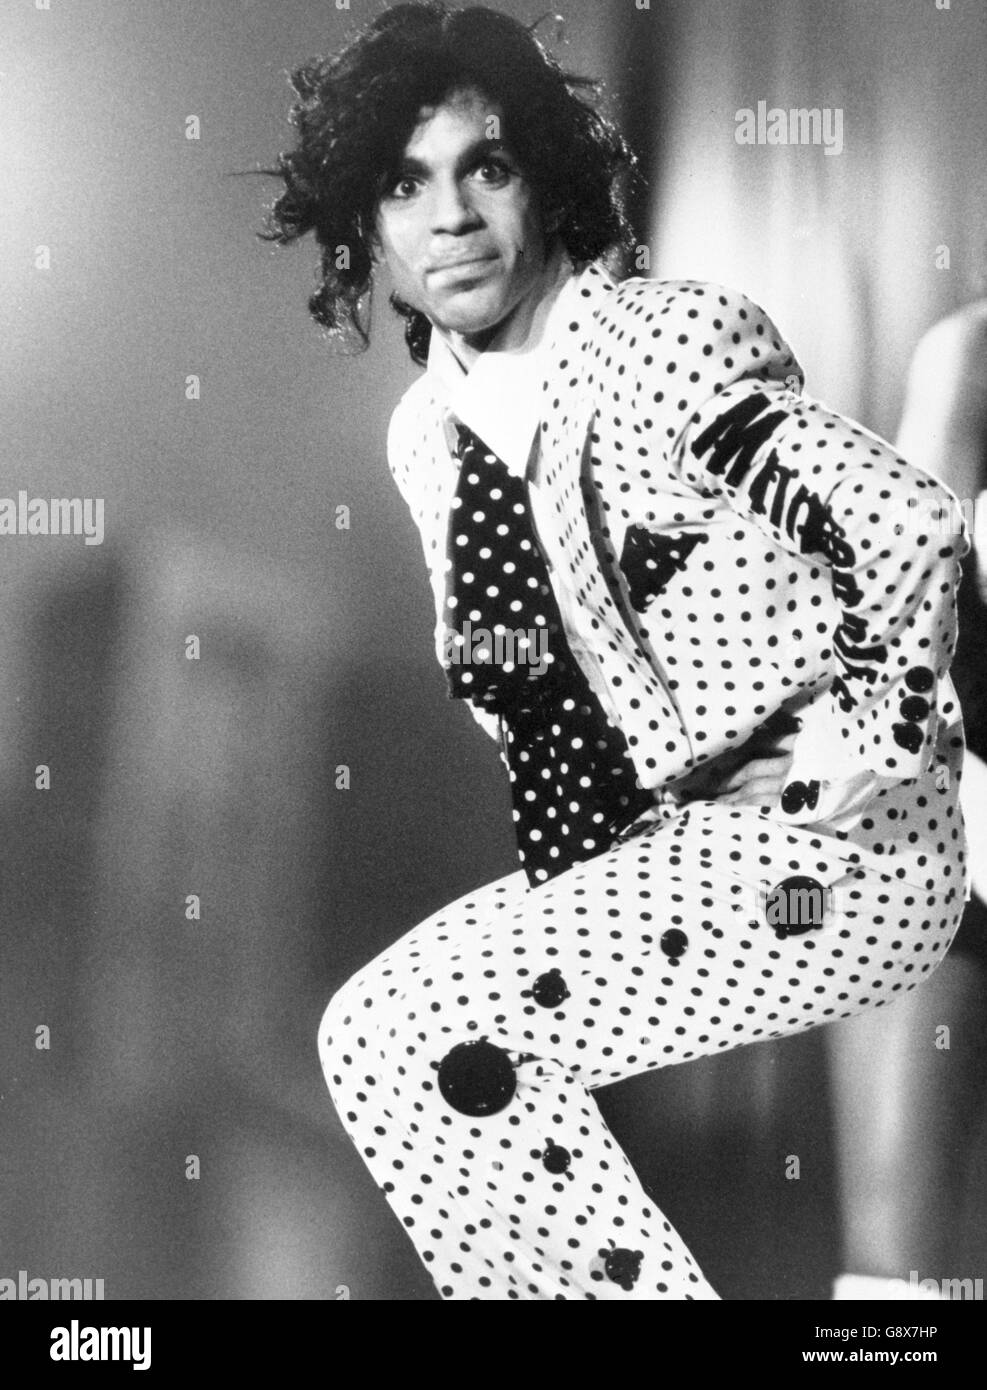 Pop star Prince during his Lovesexy concert tour Stock Photo - Alamy